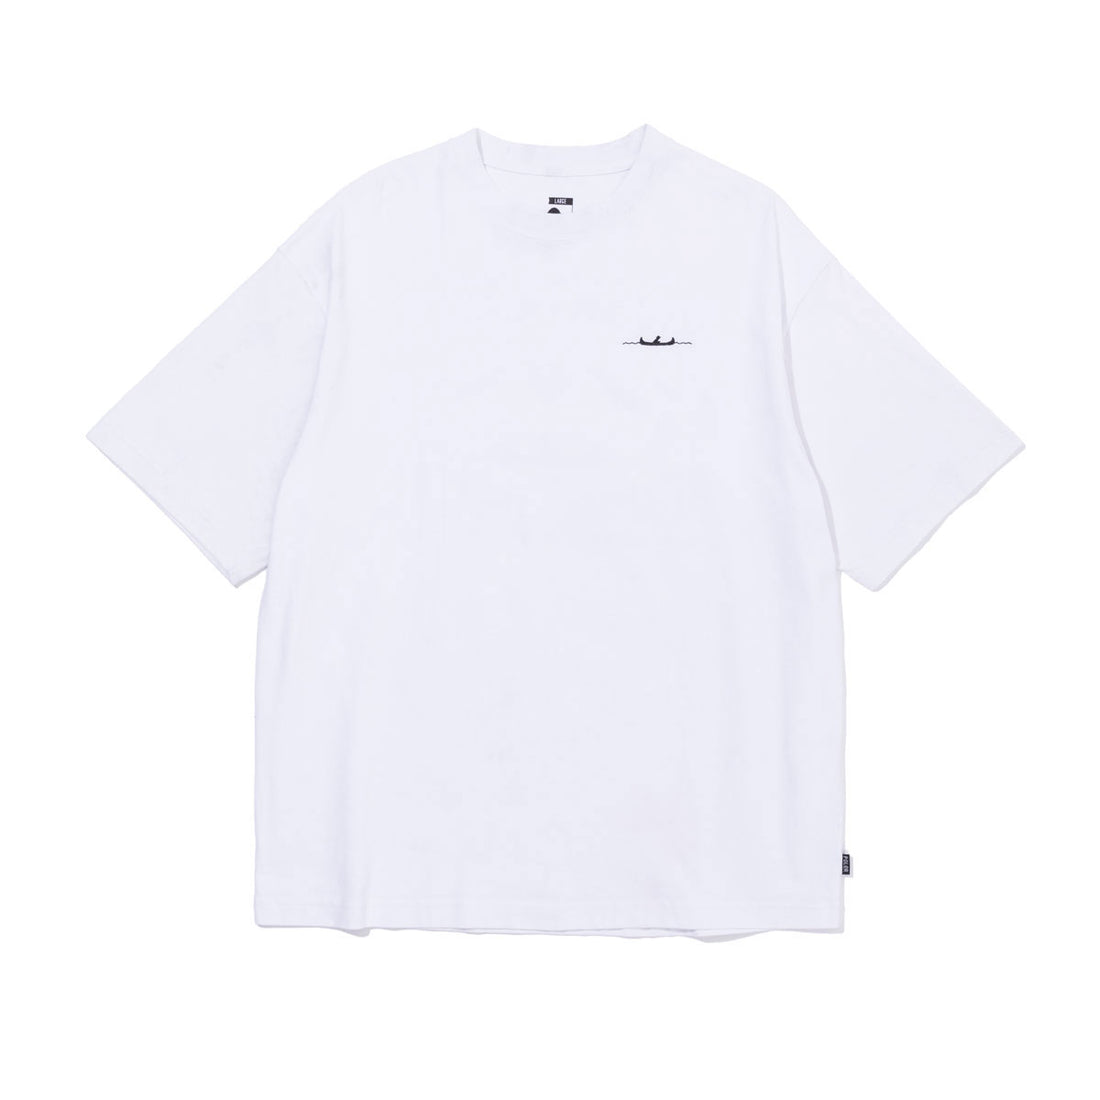 LABEL RELAX FIT TEE